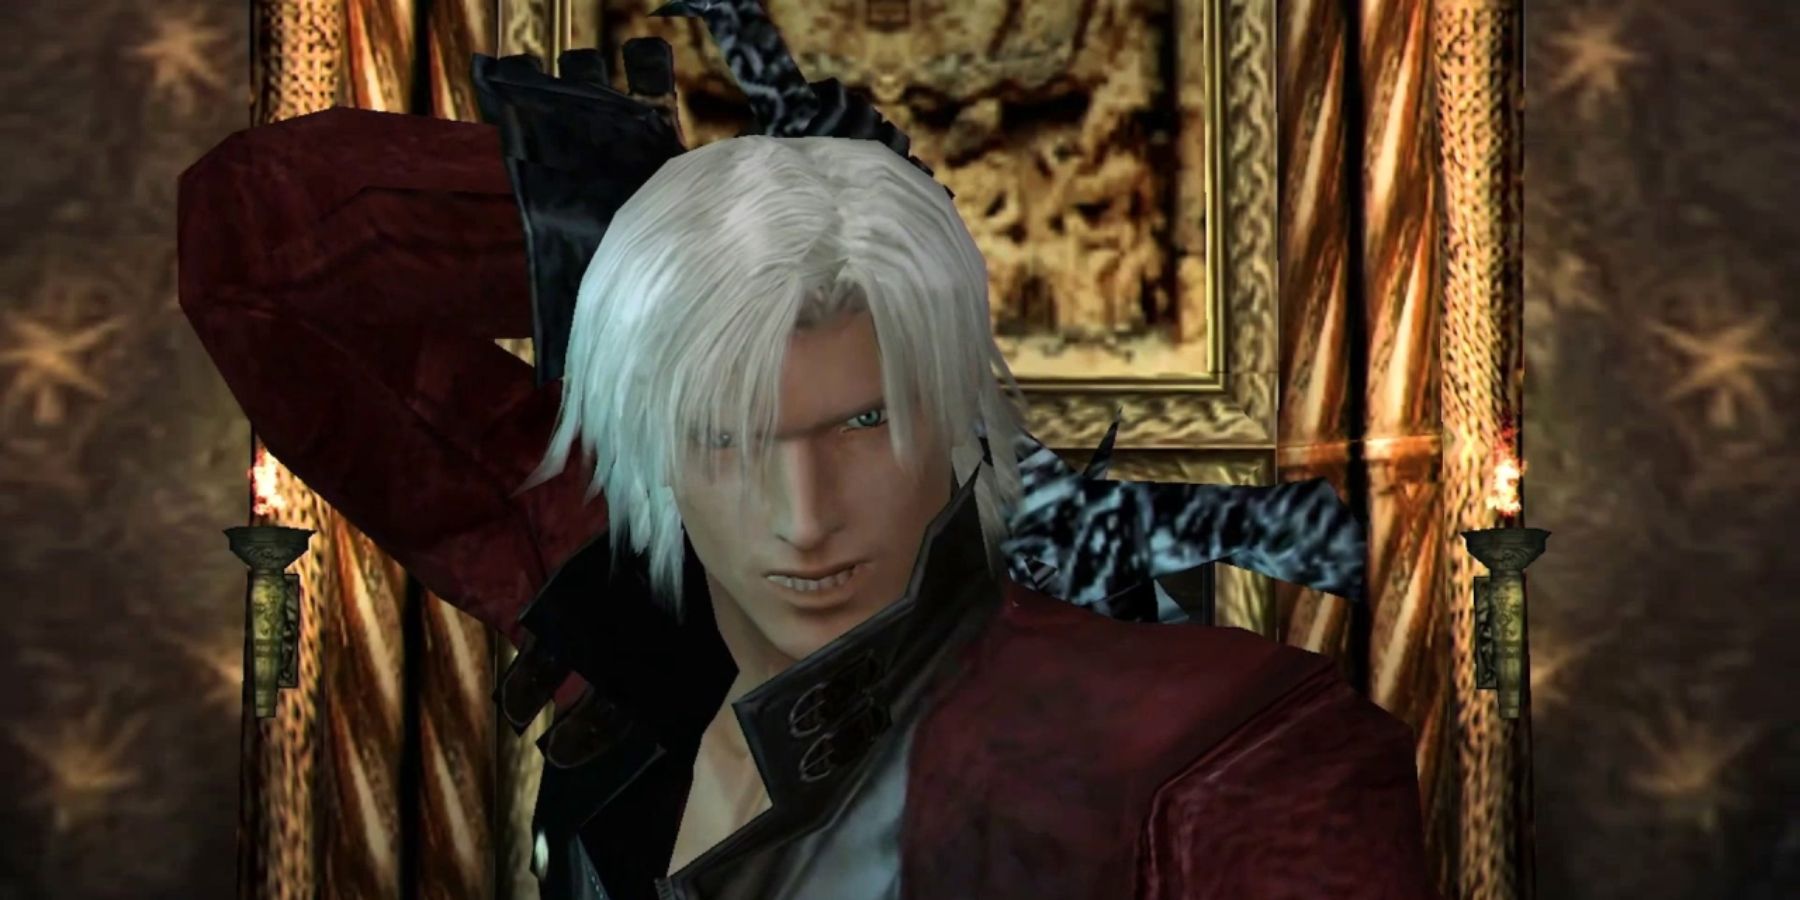 Devil May Cry 2 – Hardcore Gaming 101